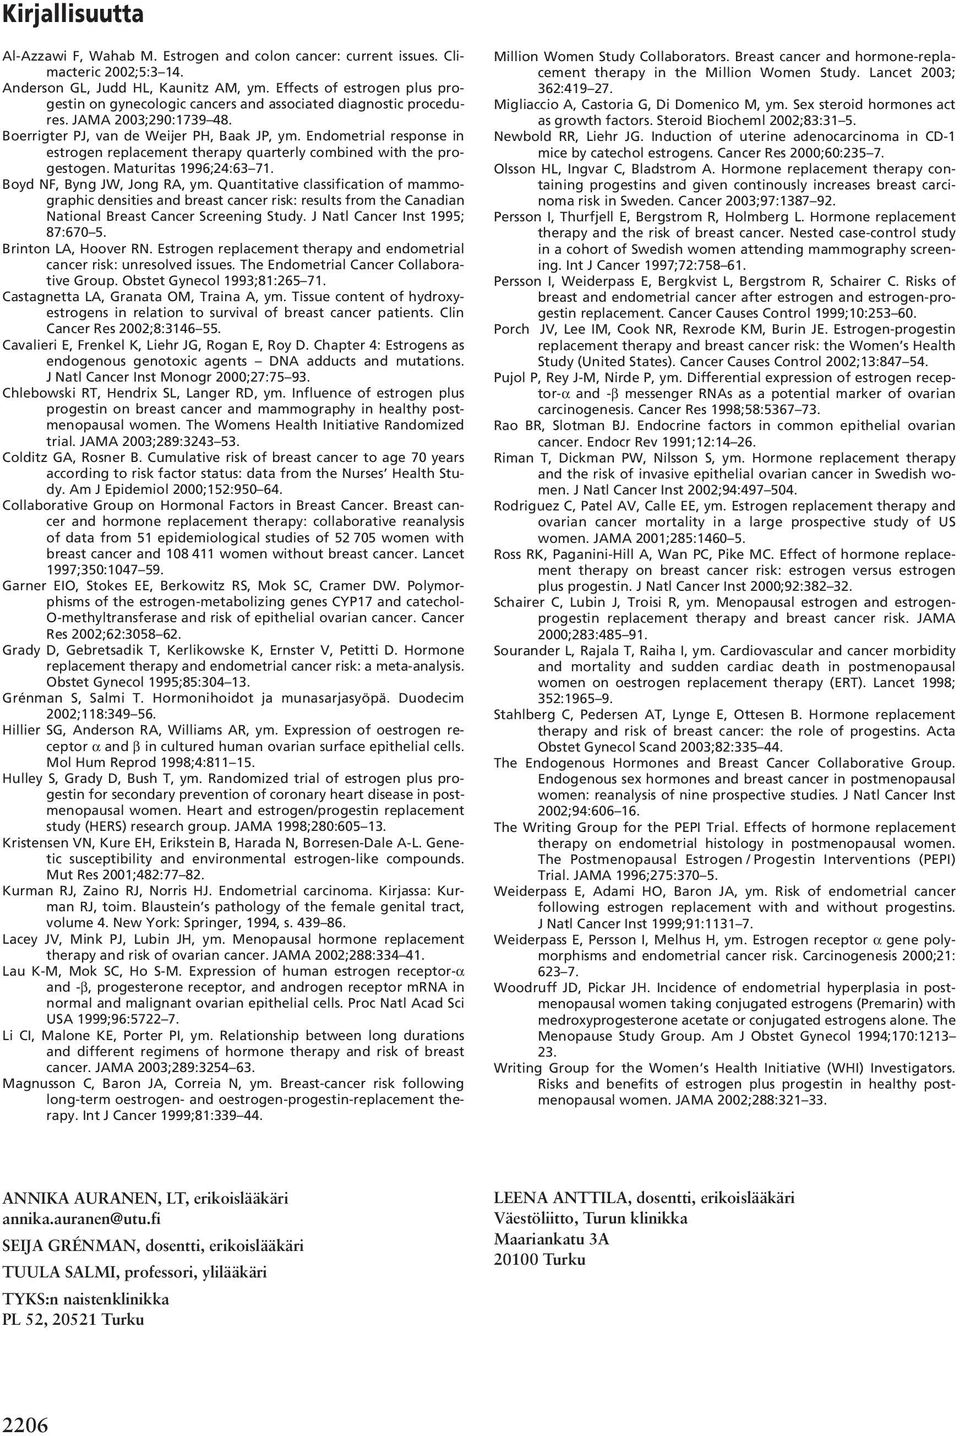 Endometrial response in estrogen replacement therapy quarterly combined with the progestogen. Maturitas 1996;24:63 71. Boyd NF, Byng JW, Jong RA, ym.